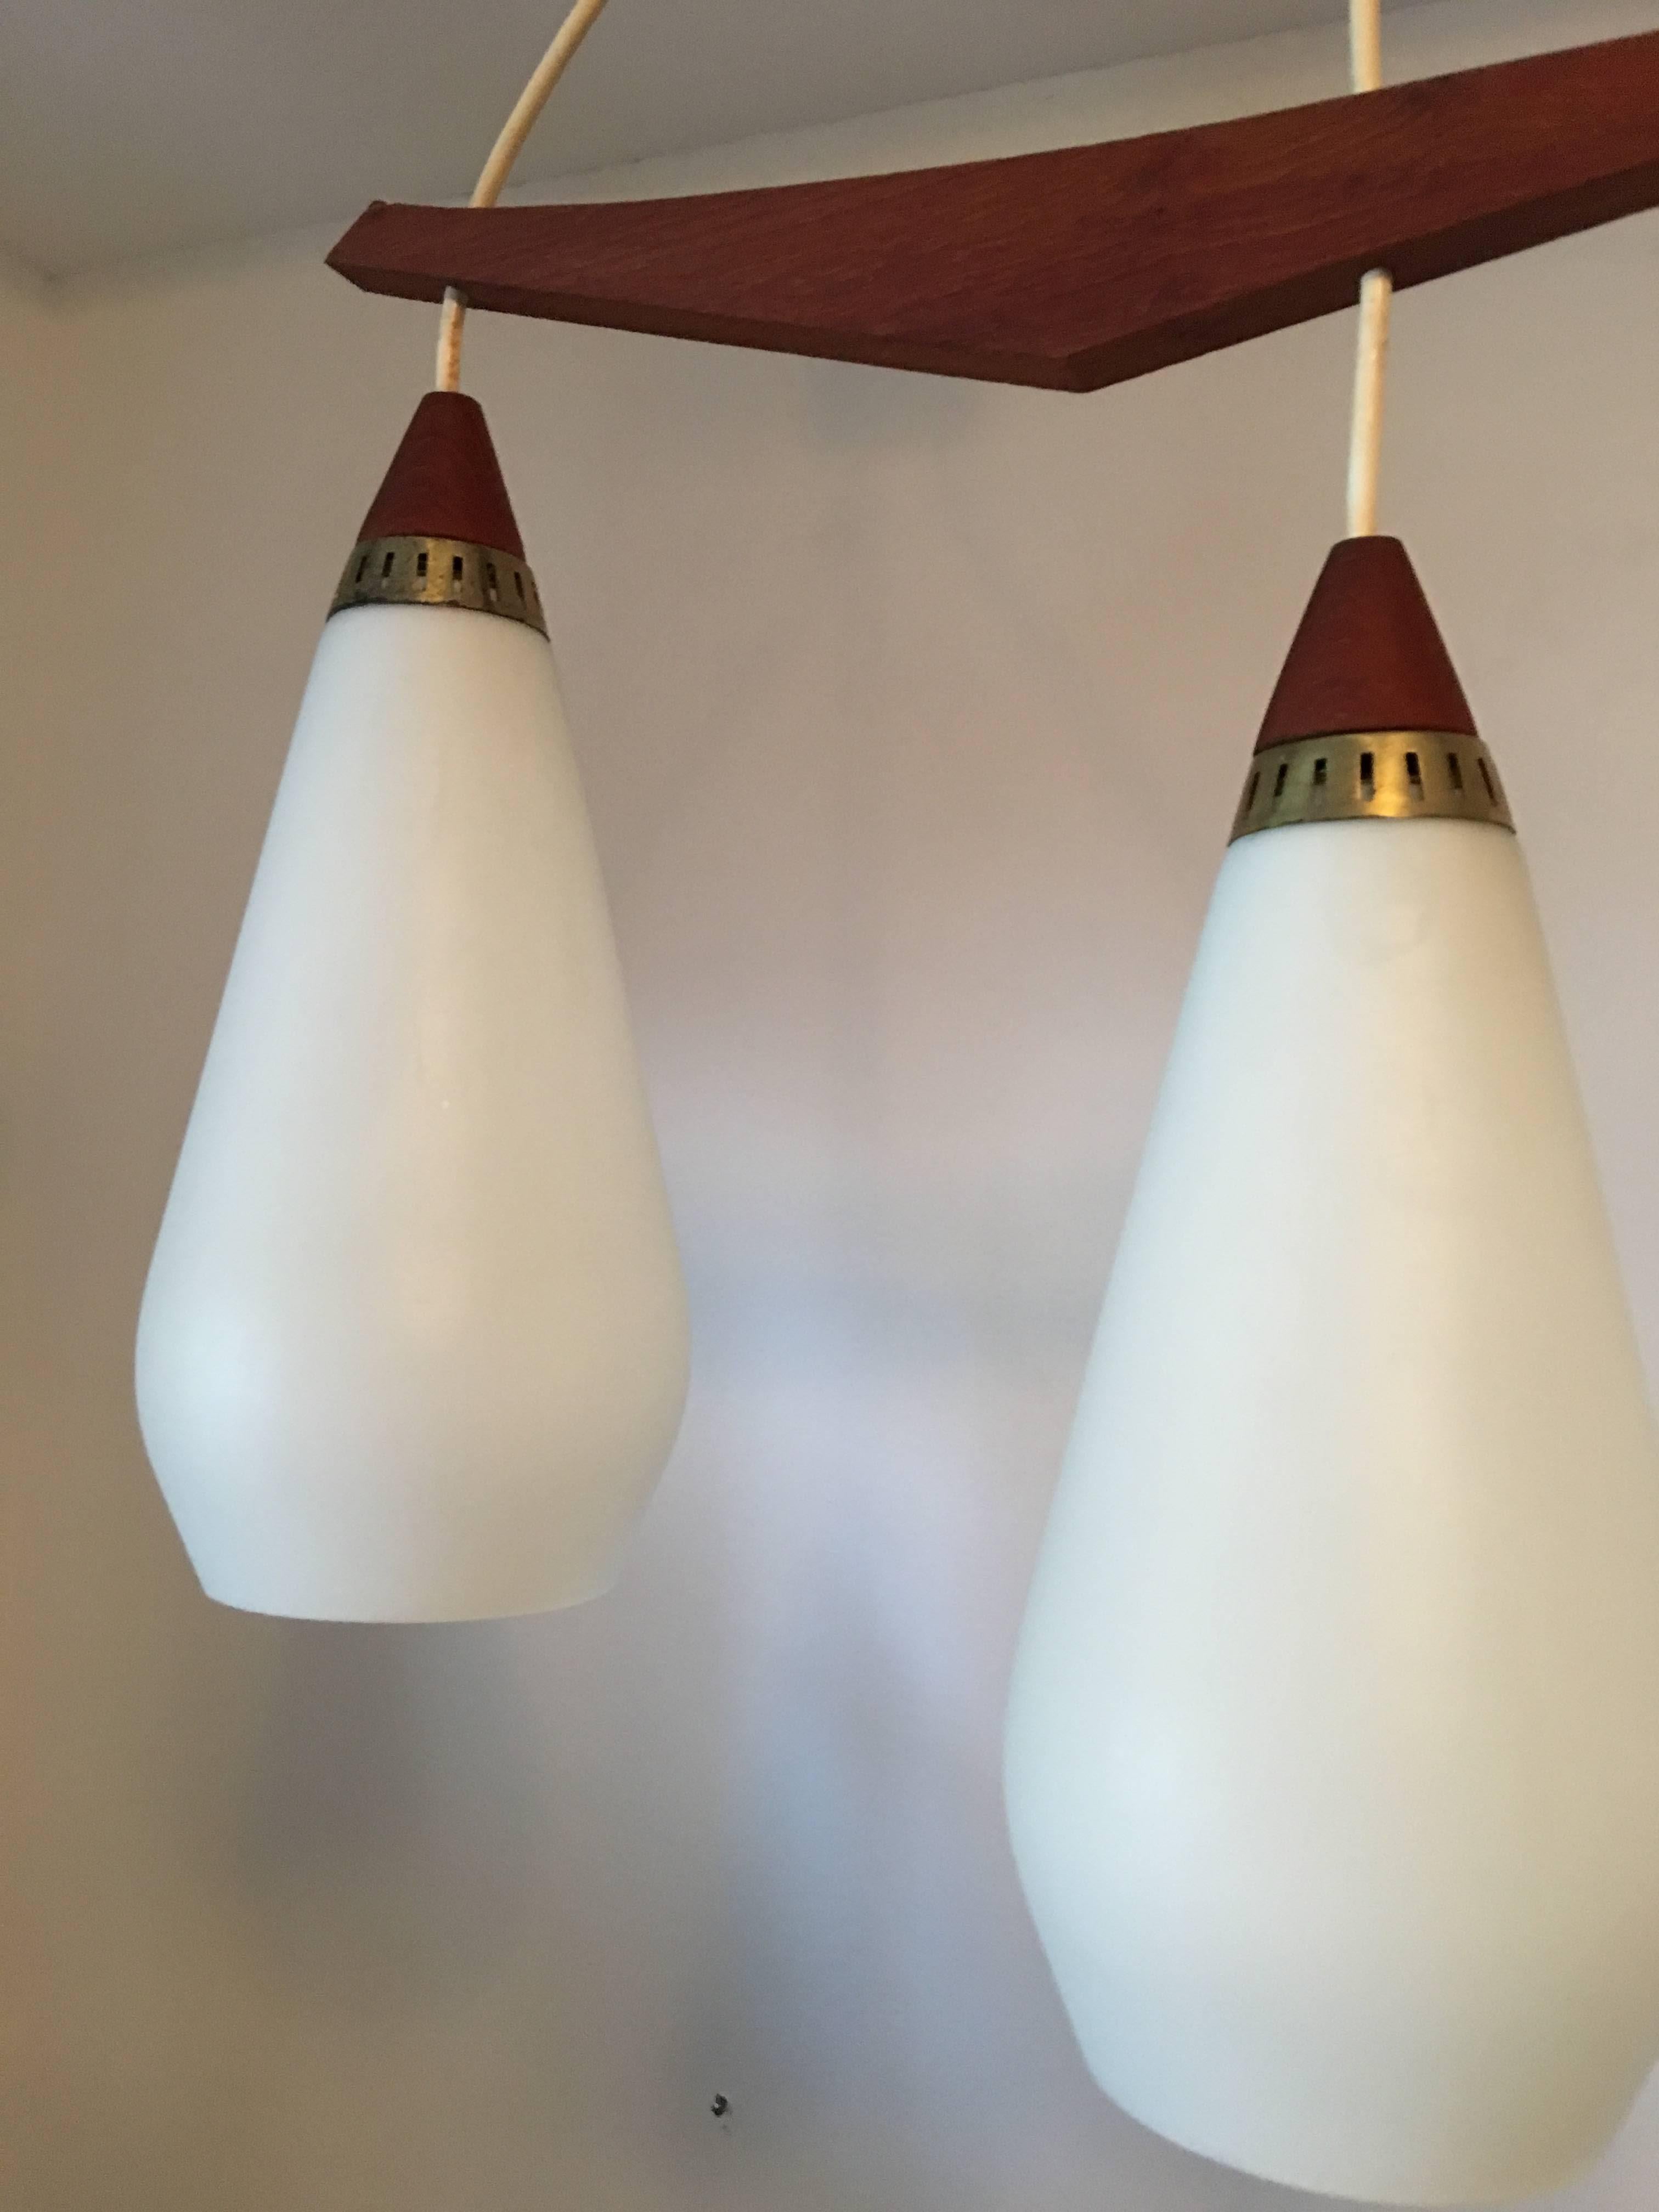 1960s Danish Teak and Milk Glass Chandelier In Good Condition For Sale In Frisco, TX